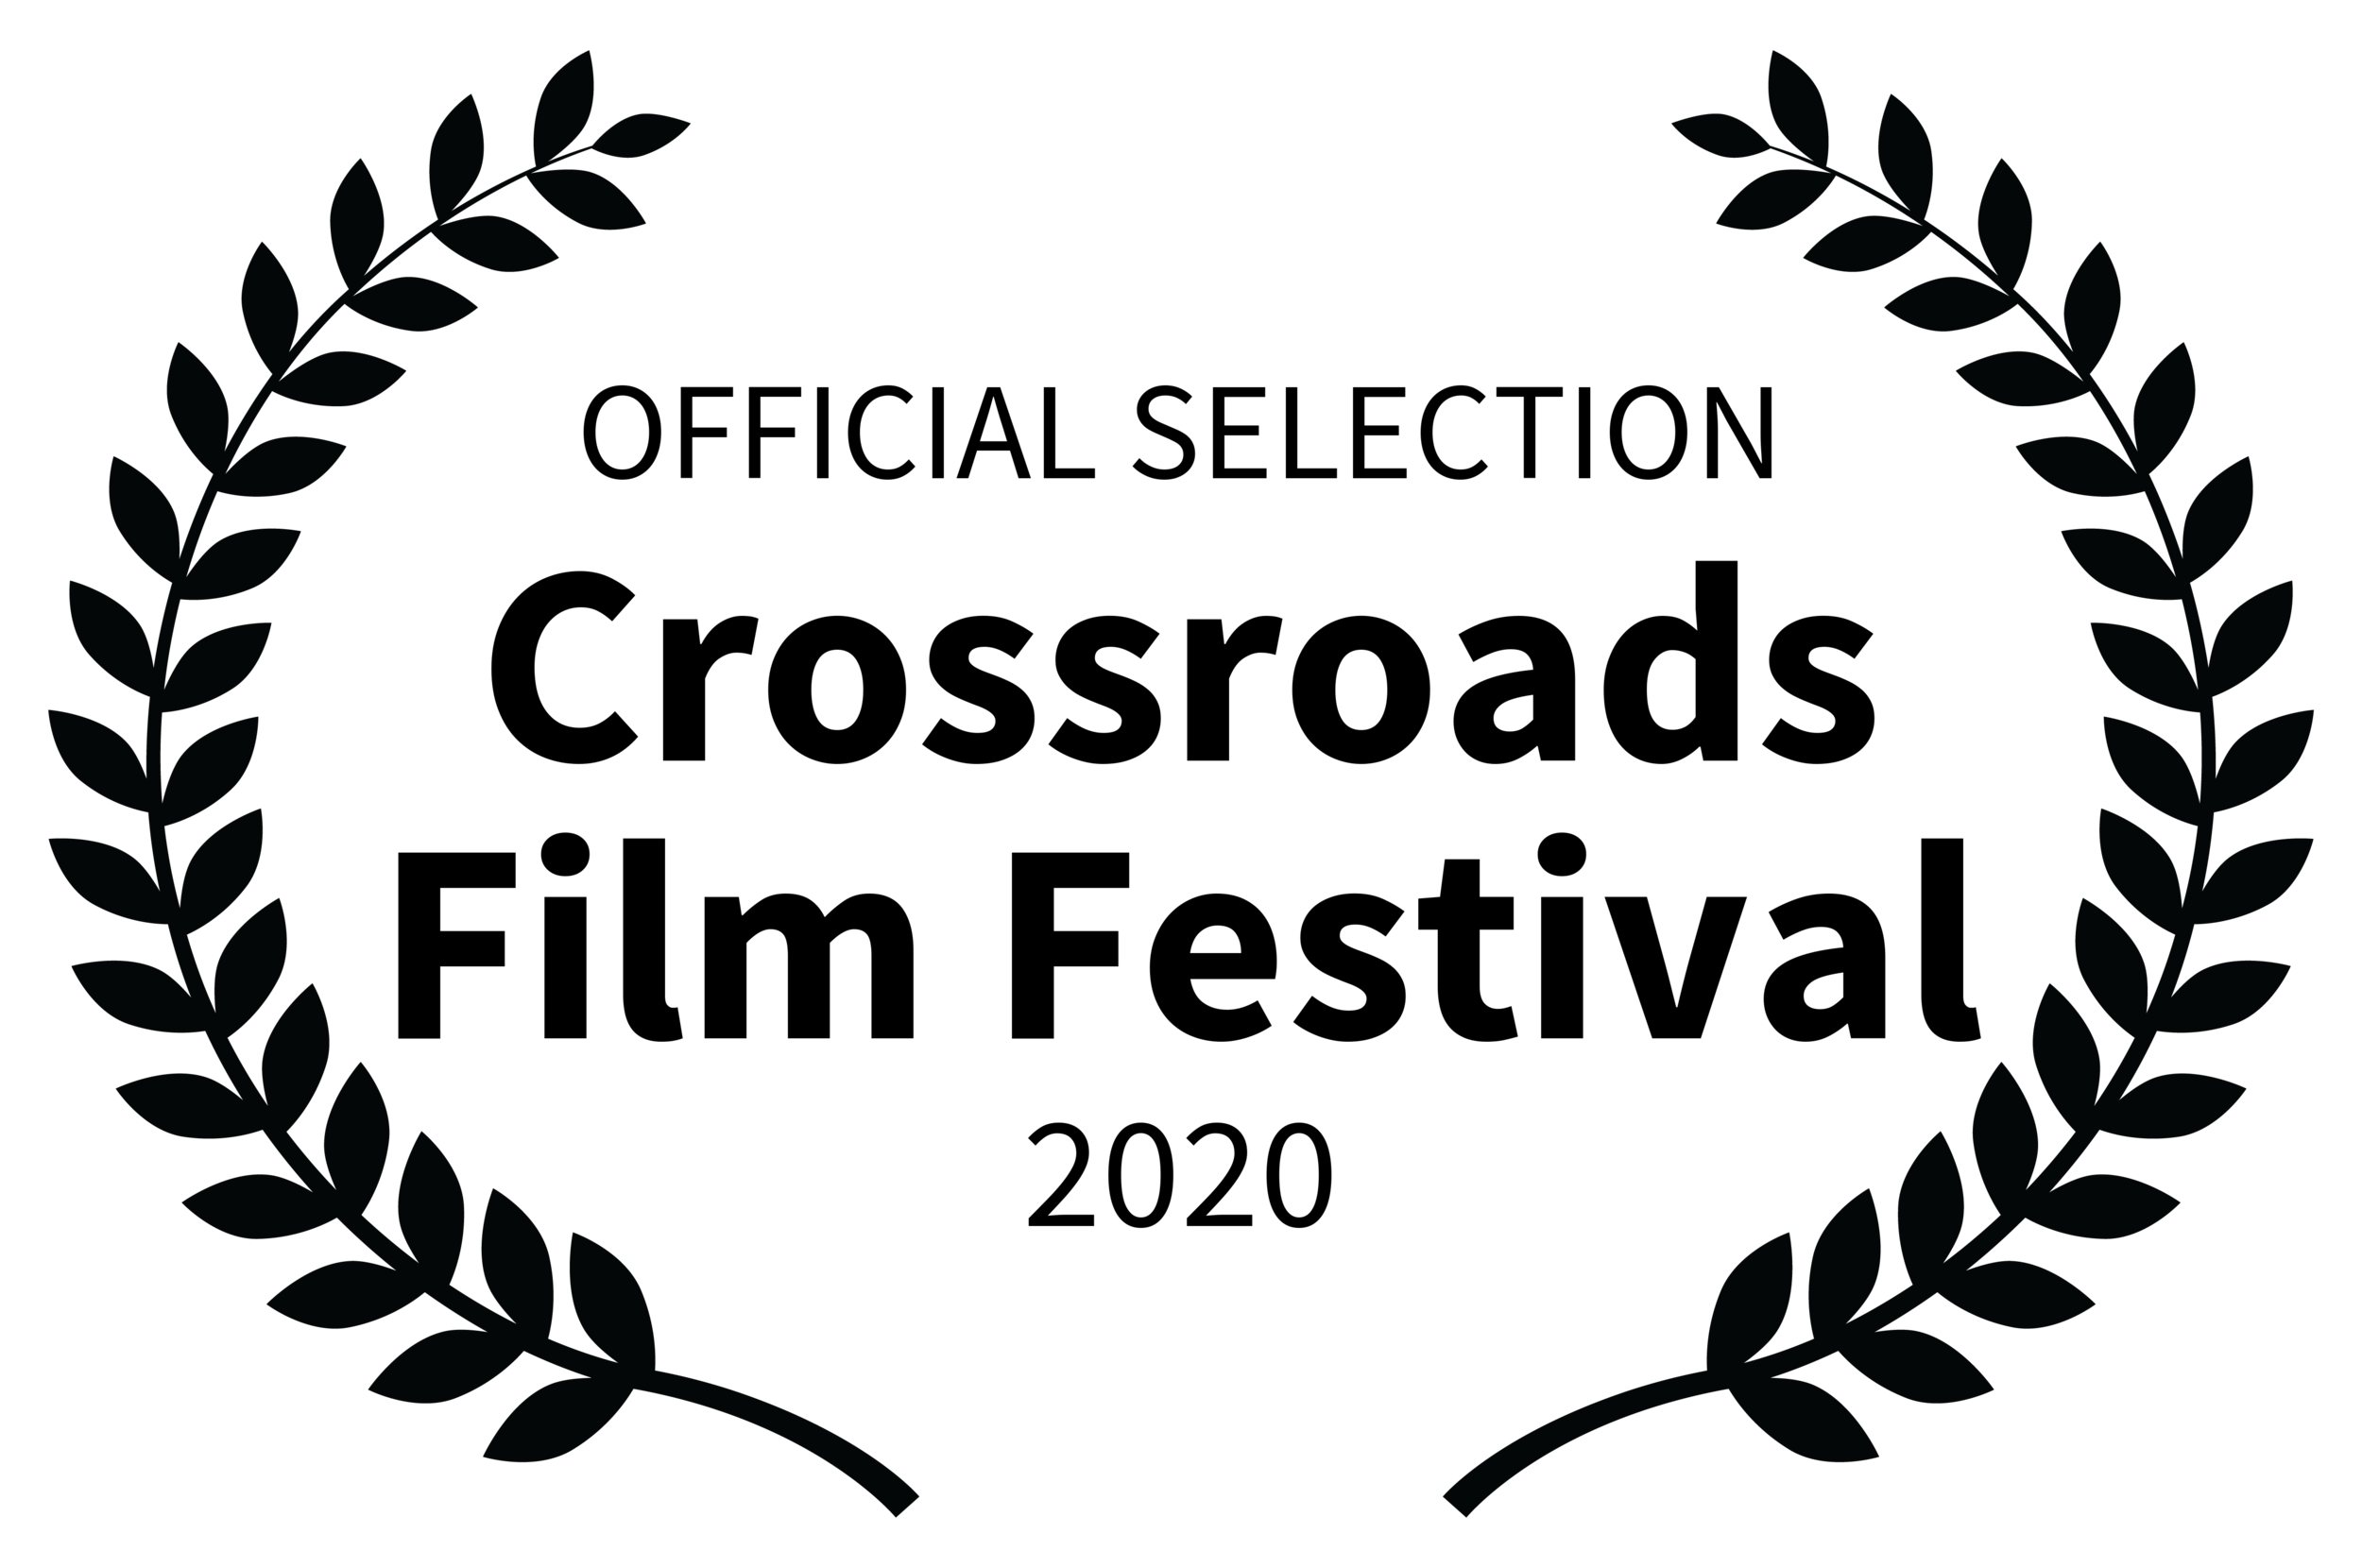 OFFICIALSELECTION-CrossroadsFilmFestival-2020.png